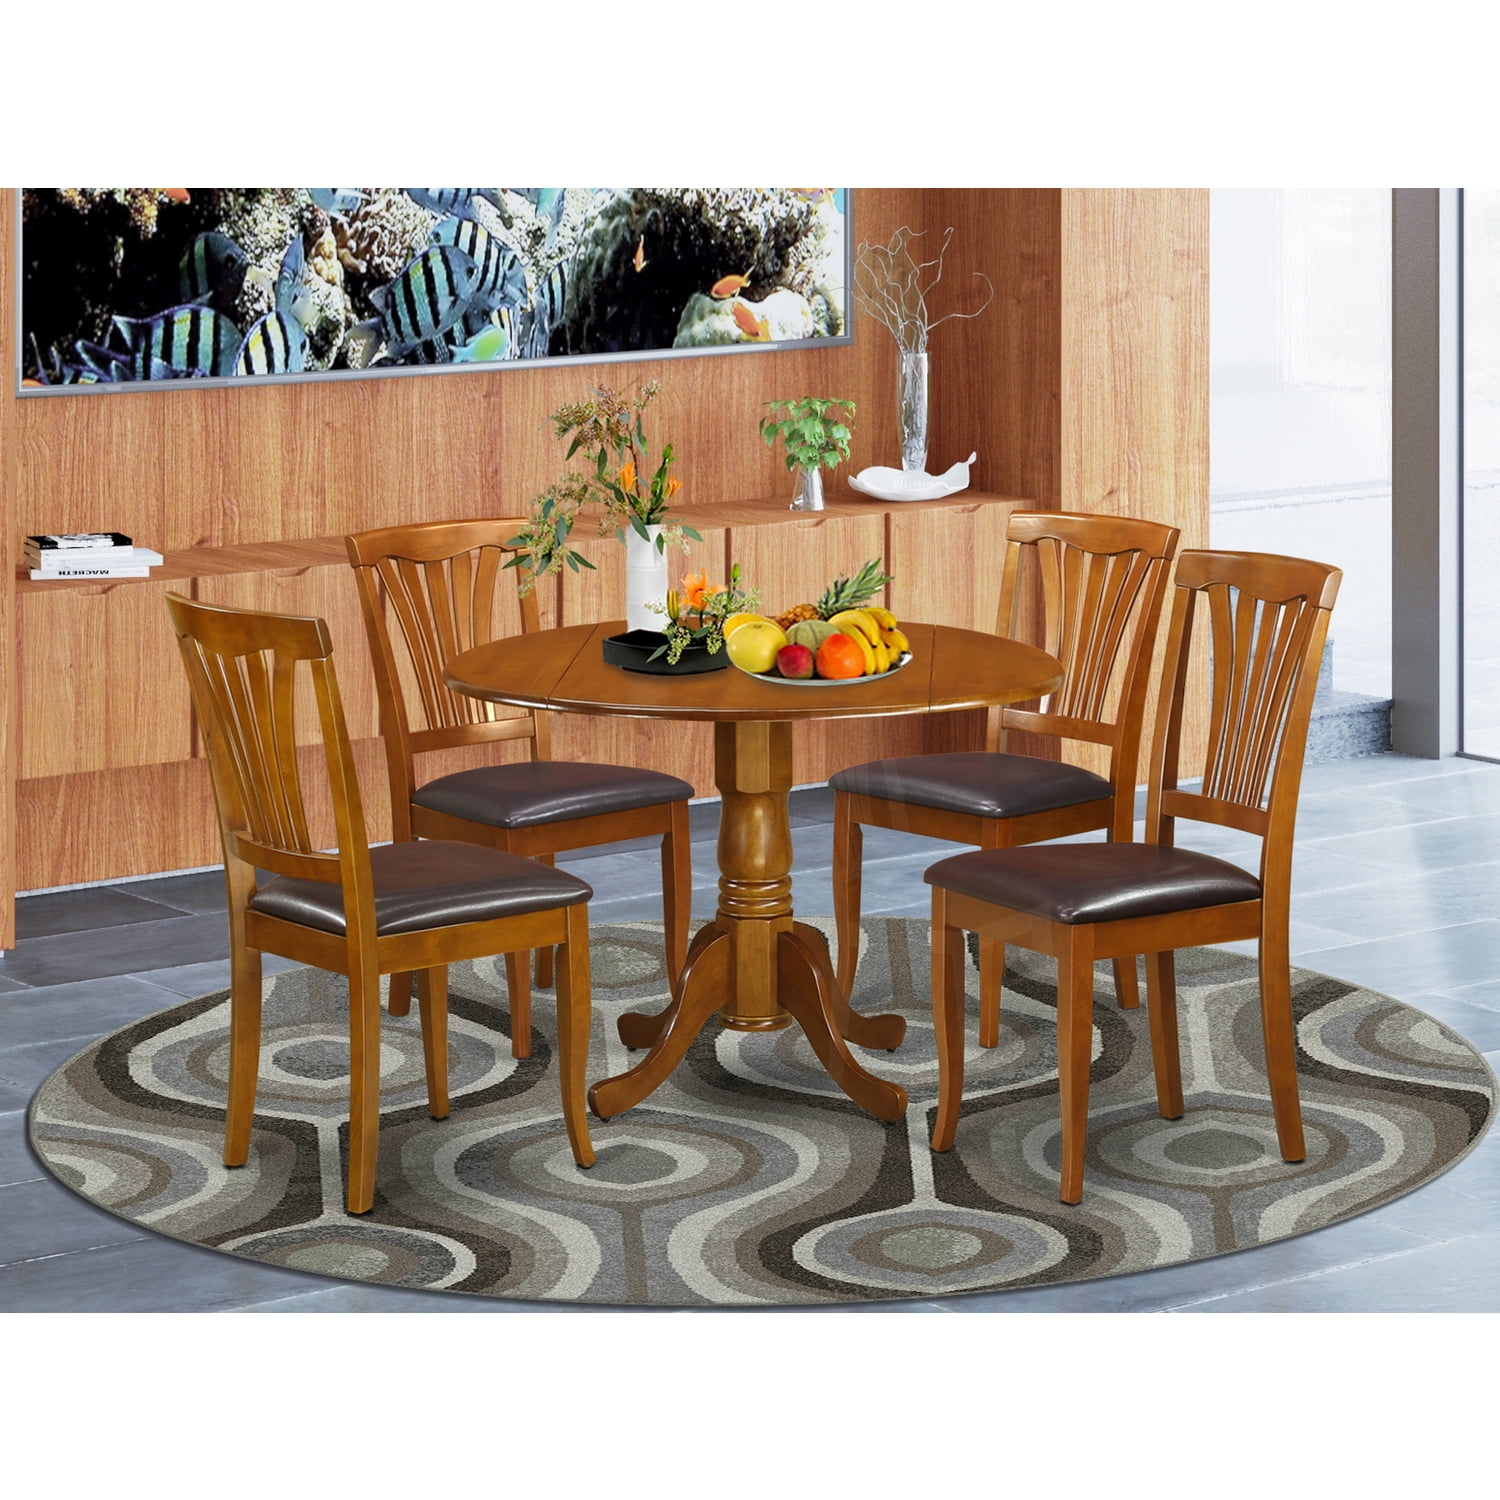 Kitchen Table Set Dining And 4, Round Dining Table Set For 4 With Leaf